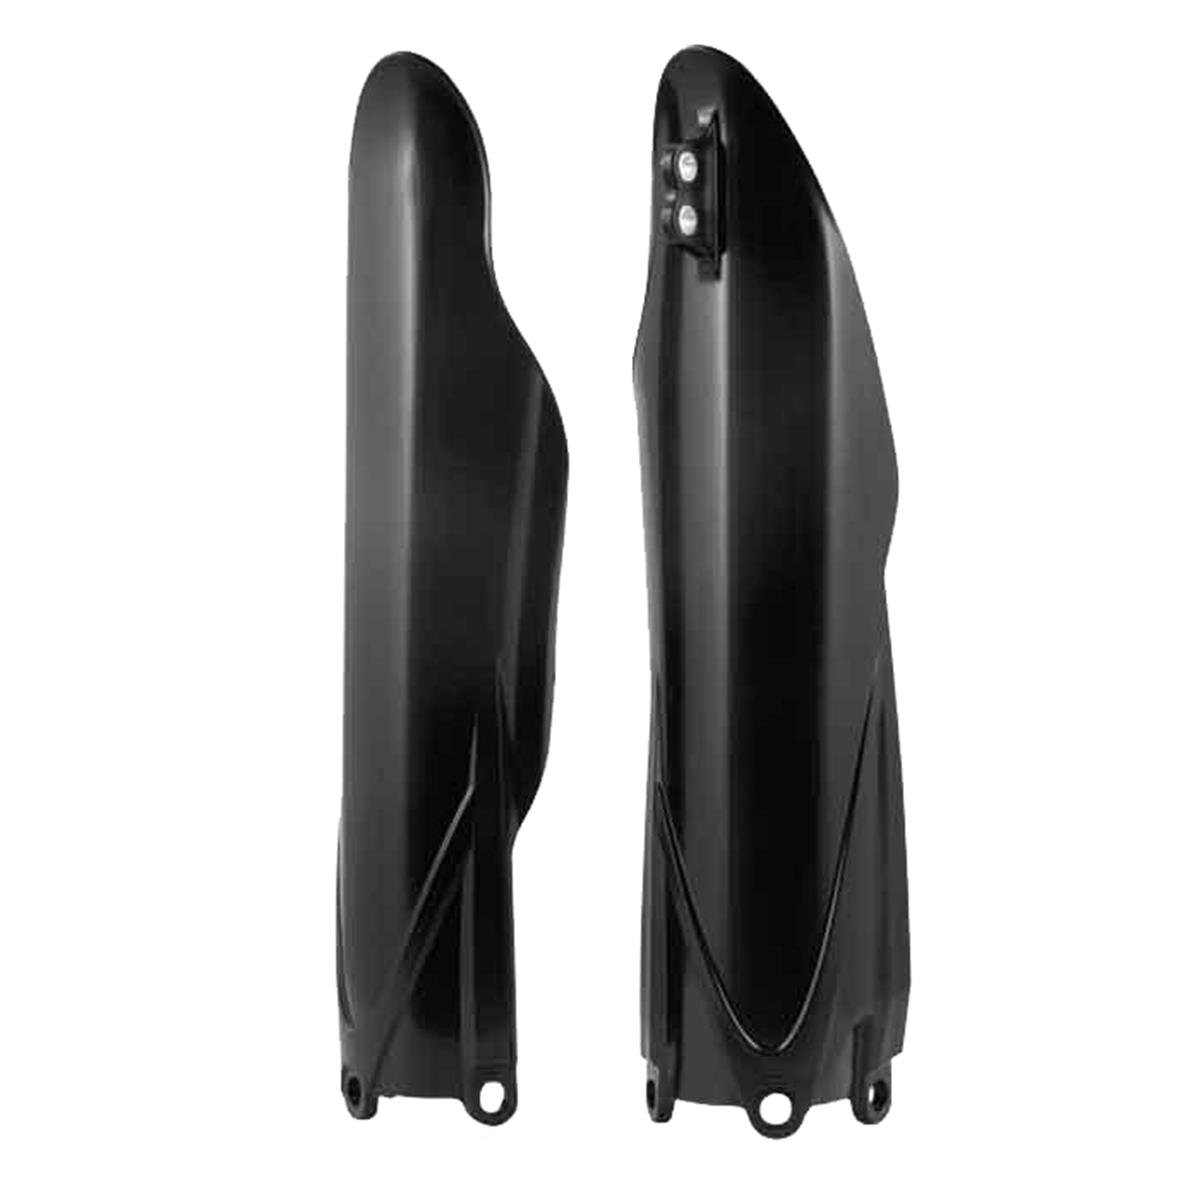 Acerbis Lower Fork Covers  Yamaha YZ 125/250 08-14, YZF 250/450 08-09, Black